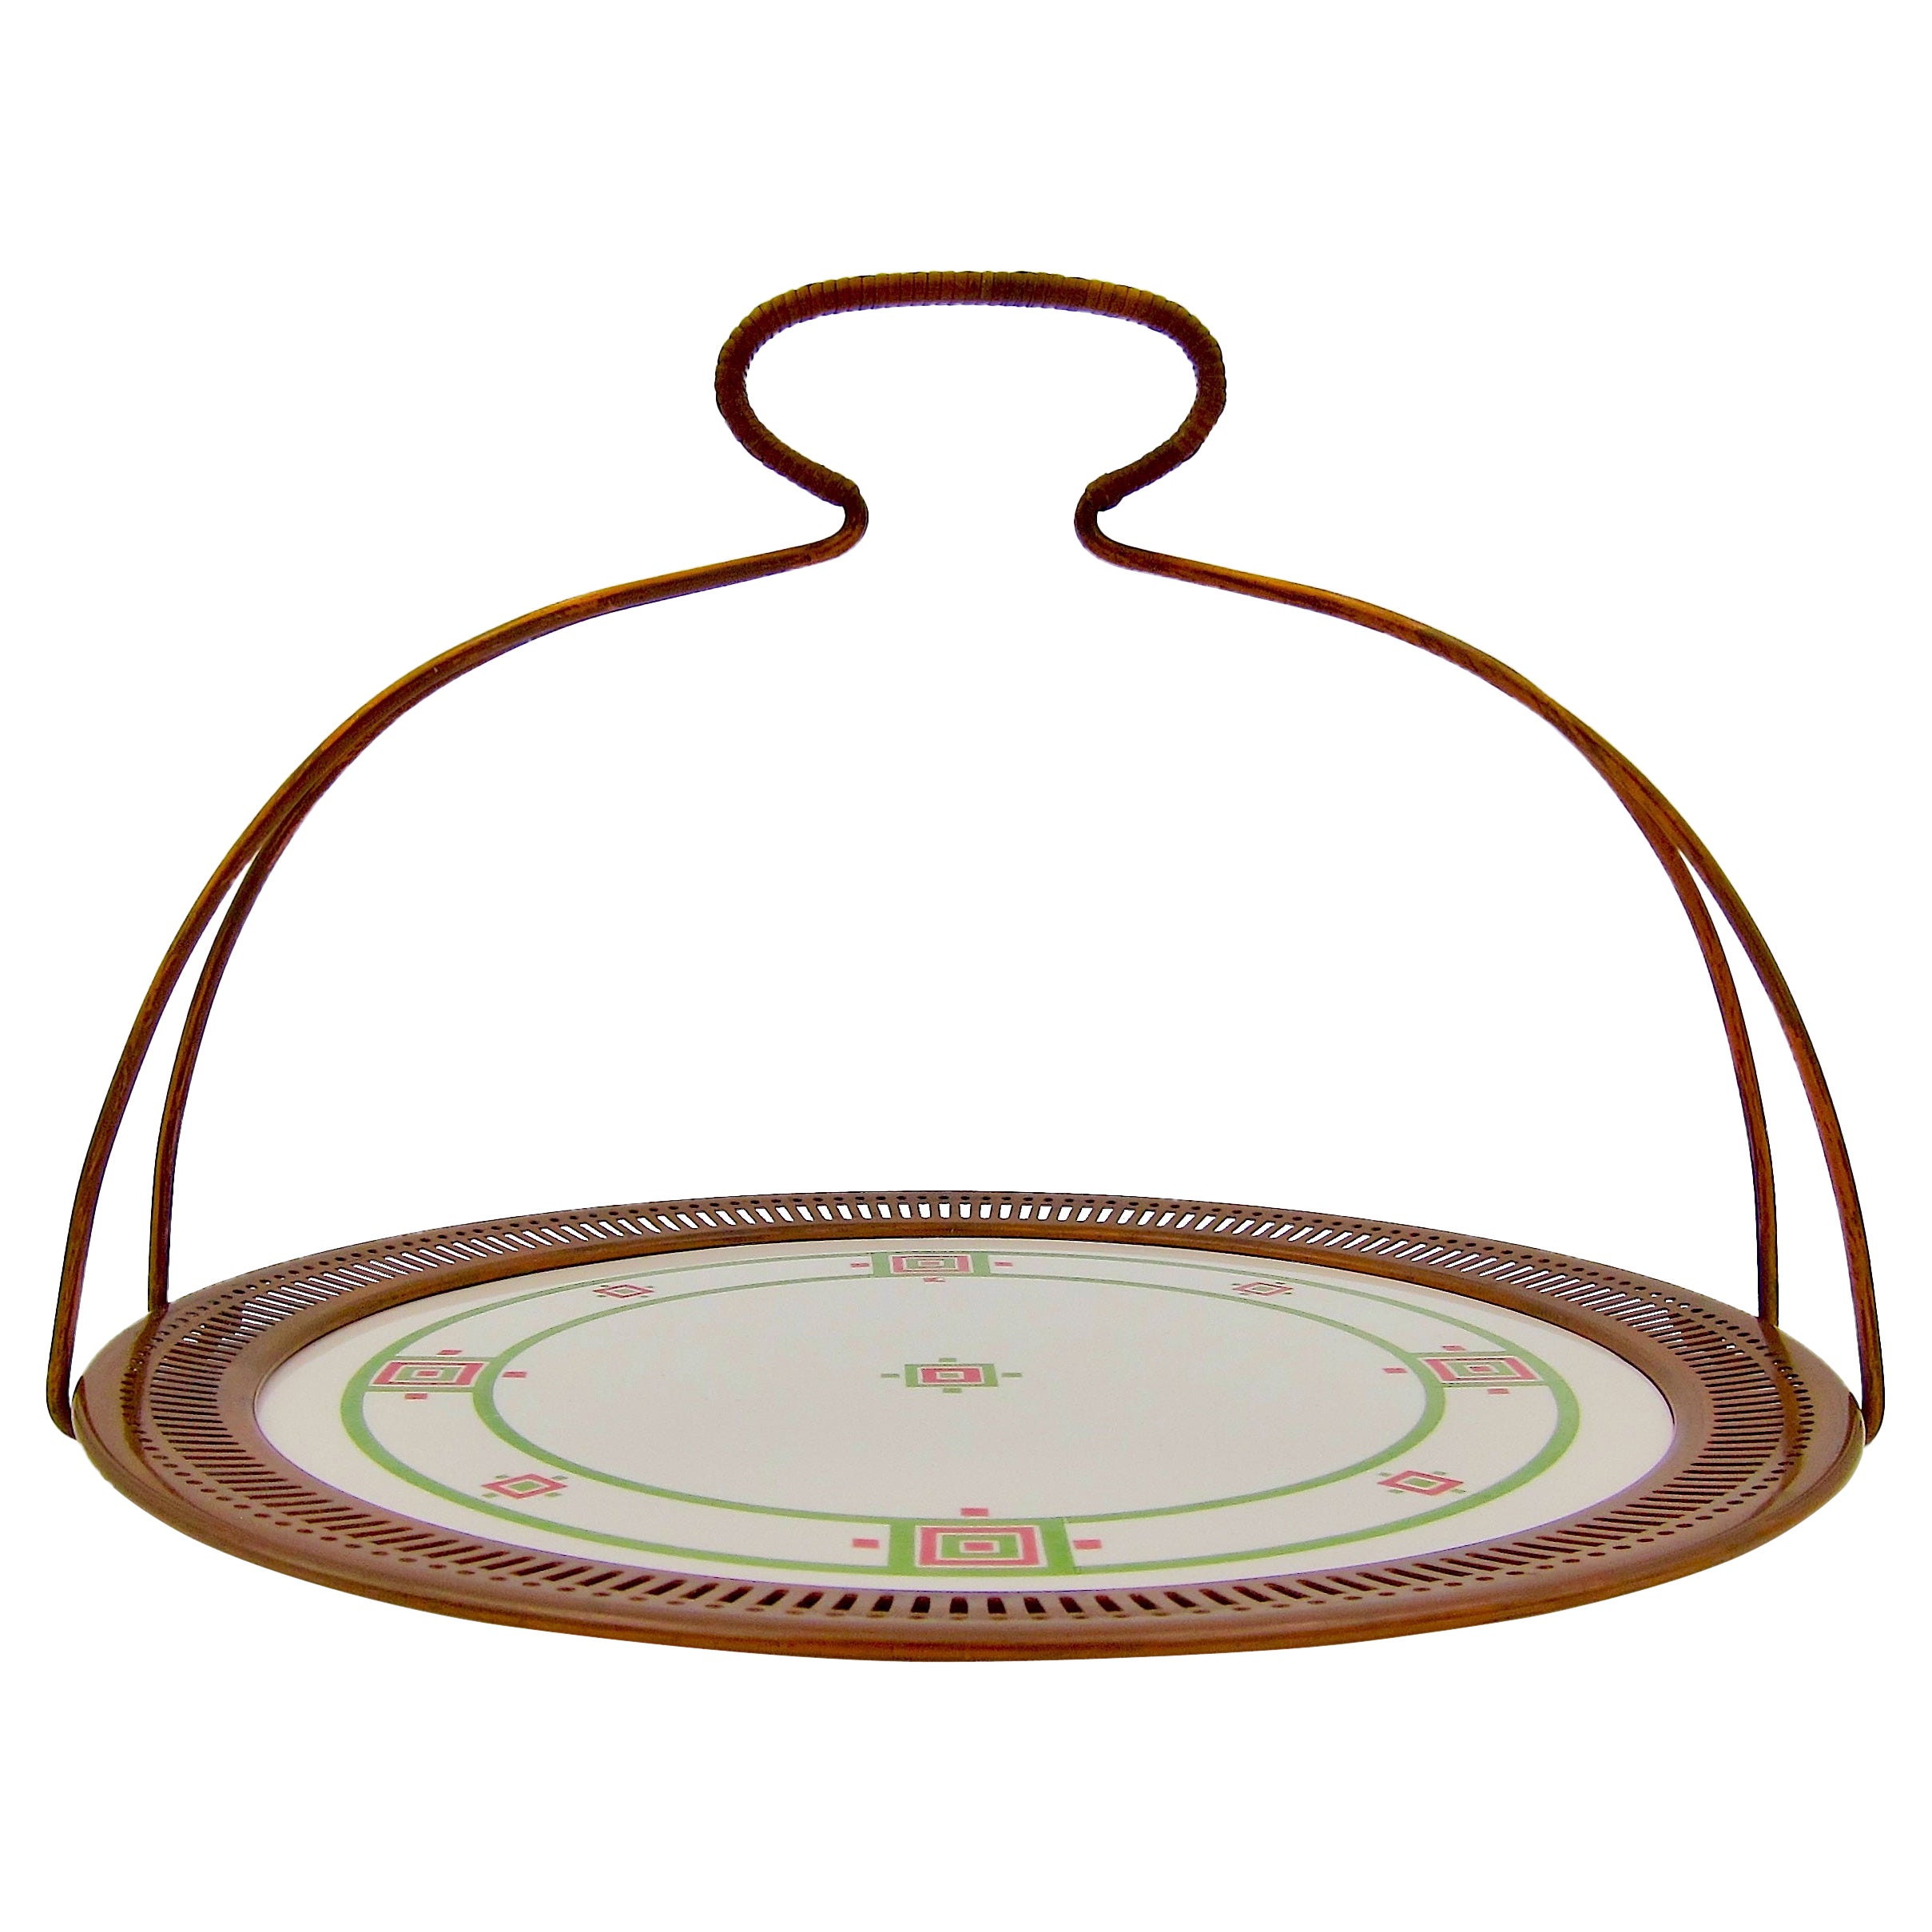 Secessionist Tray or Platter with Copper Rim and Detachable Handle